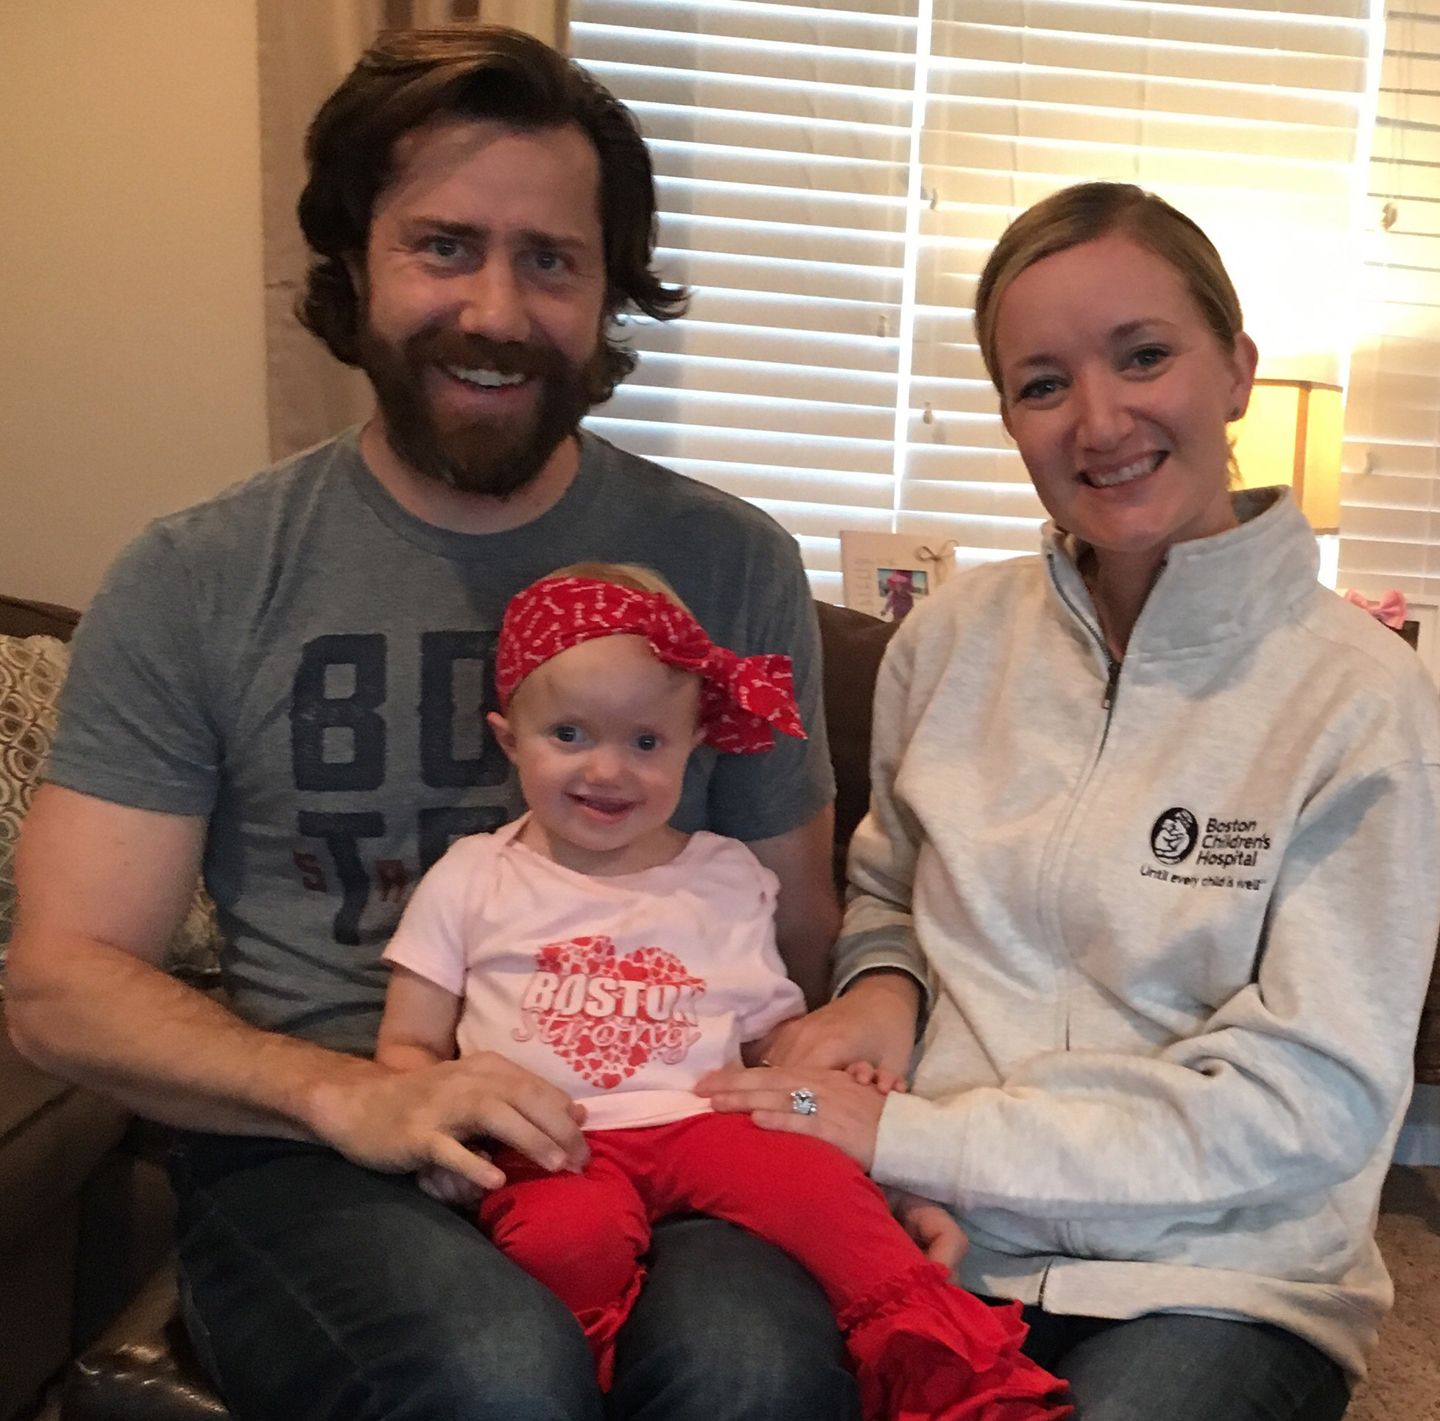 Bryan and Laura Holt with their daughter little Lucy, 2. Laura will run in next year’s Boston Marathon to raise money for Boston Children’s Hospital’s Every Child Fund. Photo provided.